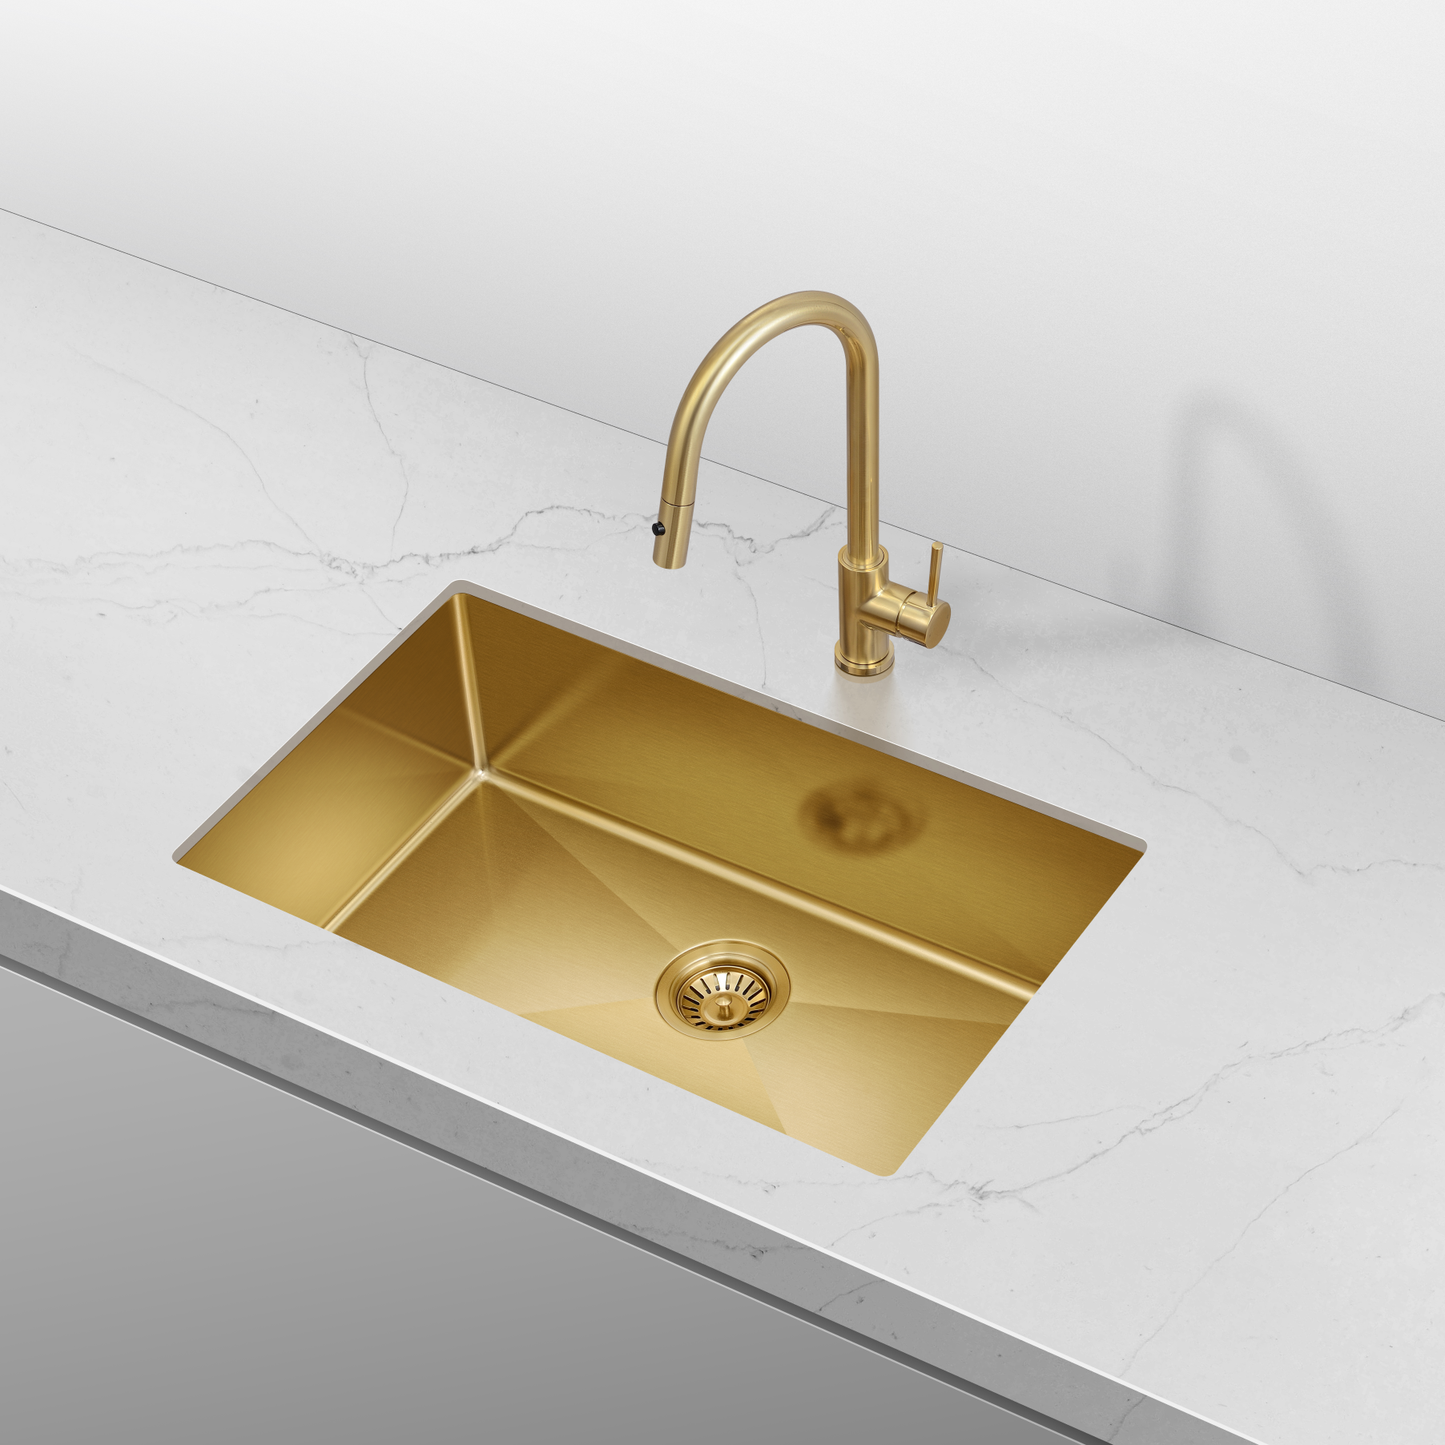 Retto 750mm x 450mm x 230mm Stainless Steel Sink | Brushed Brass (gold) |